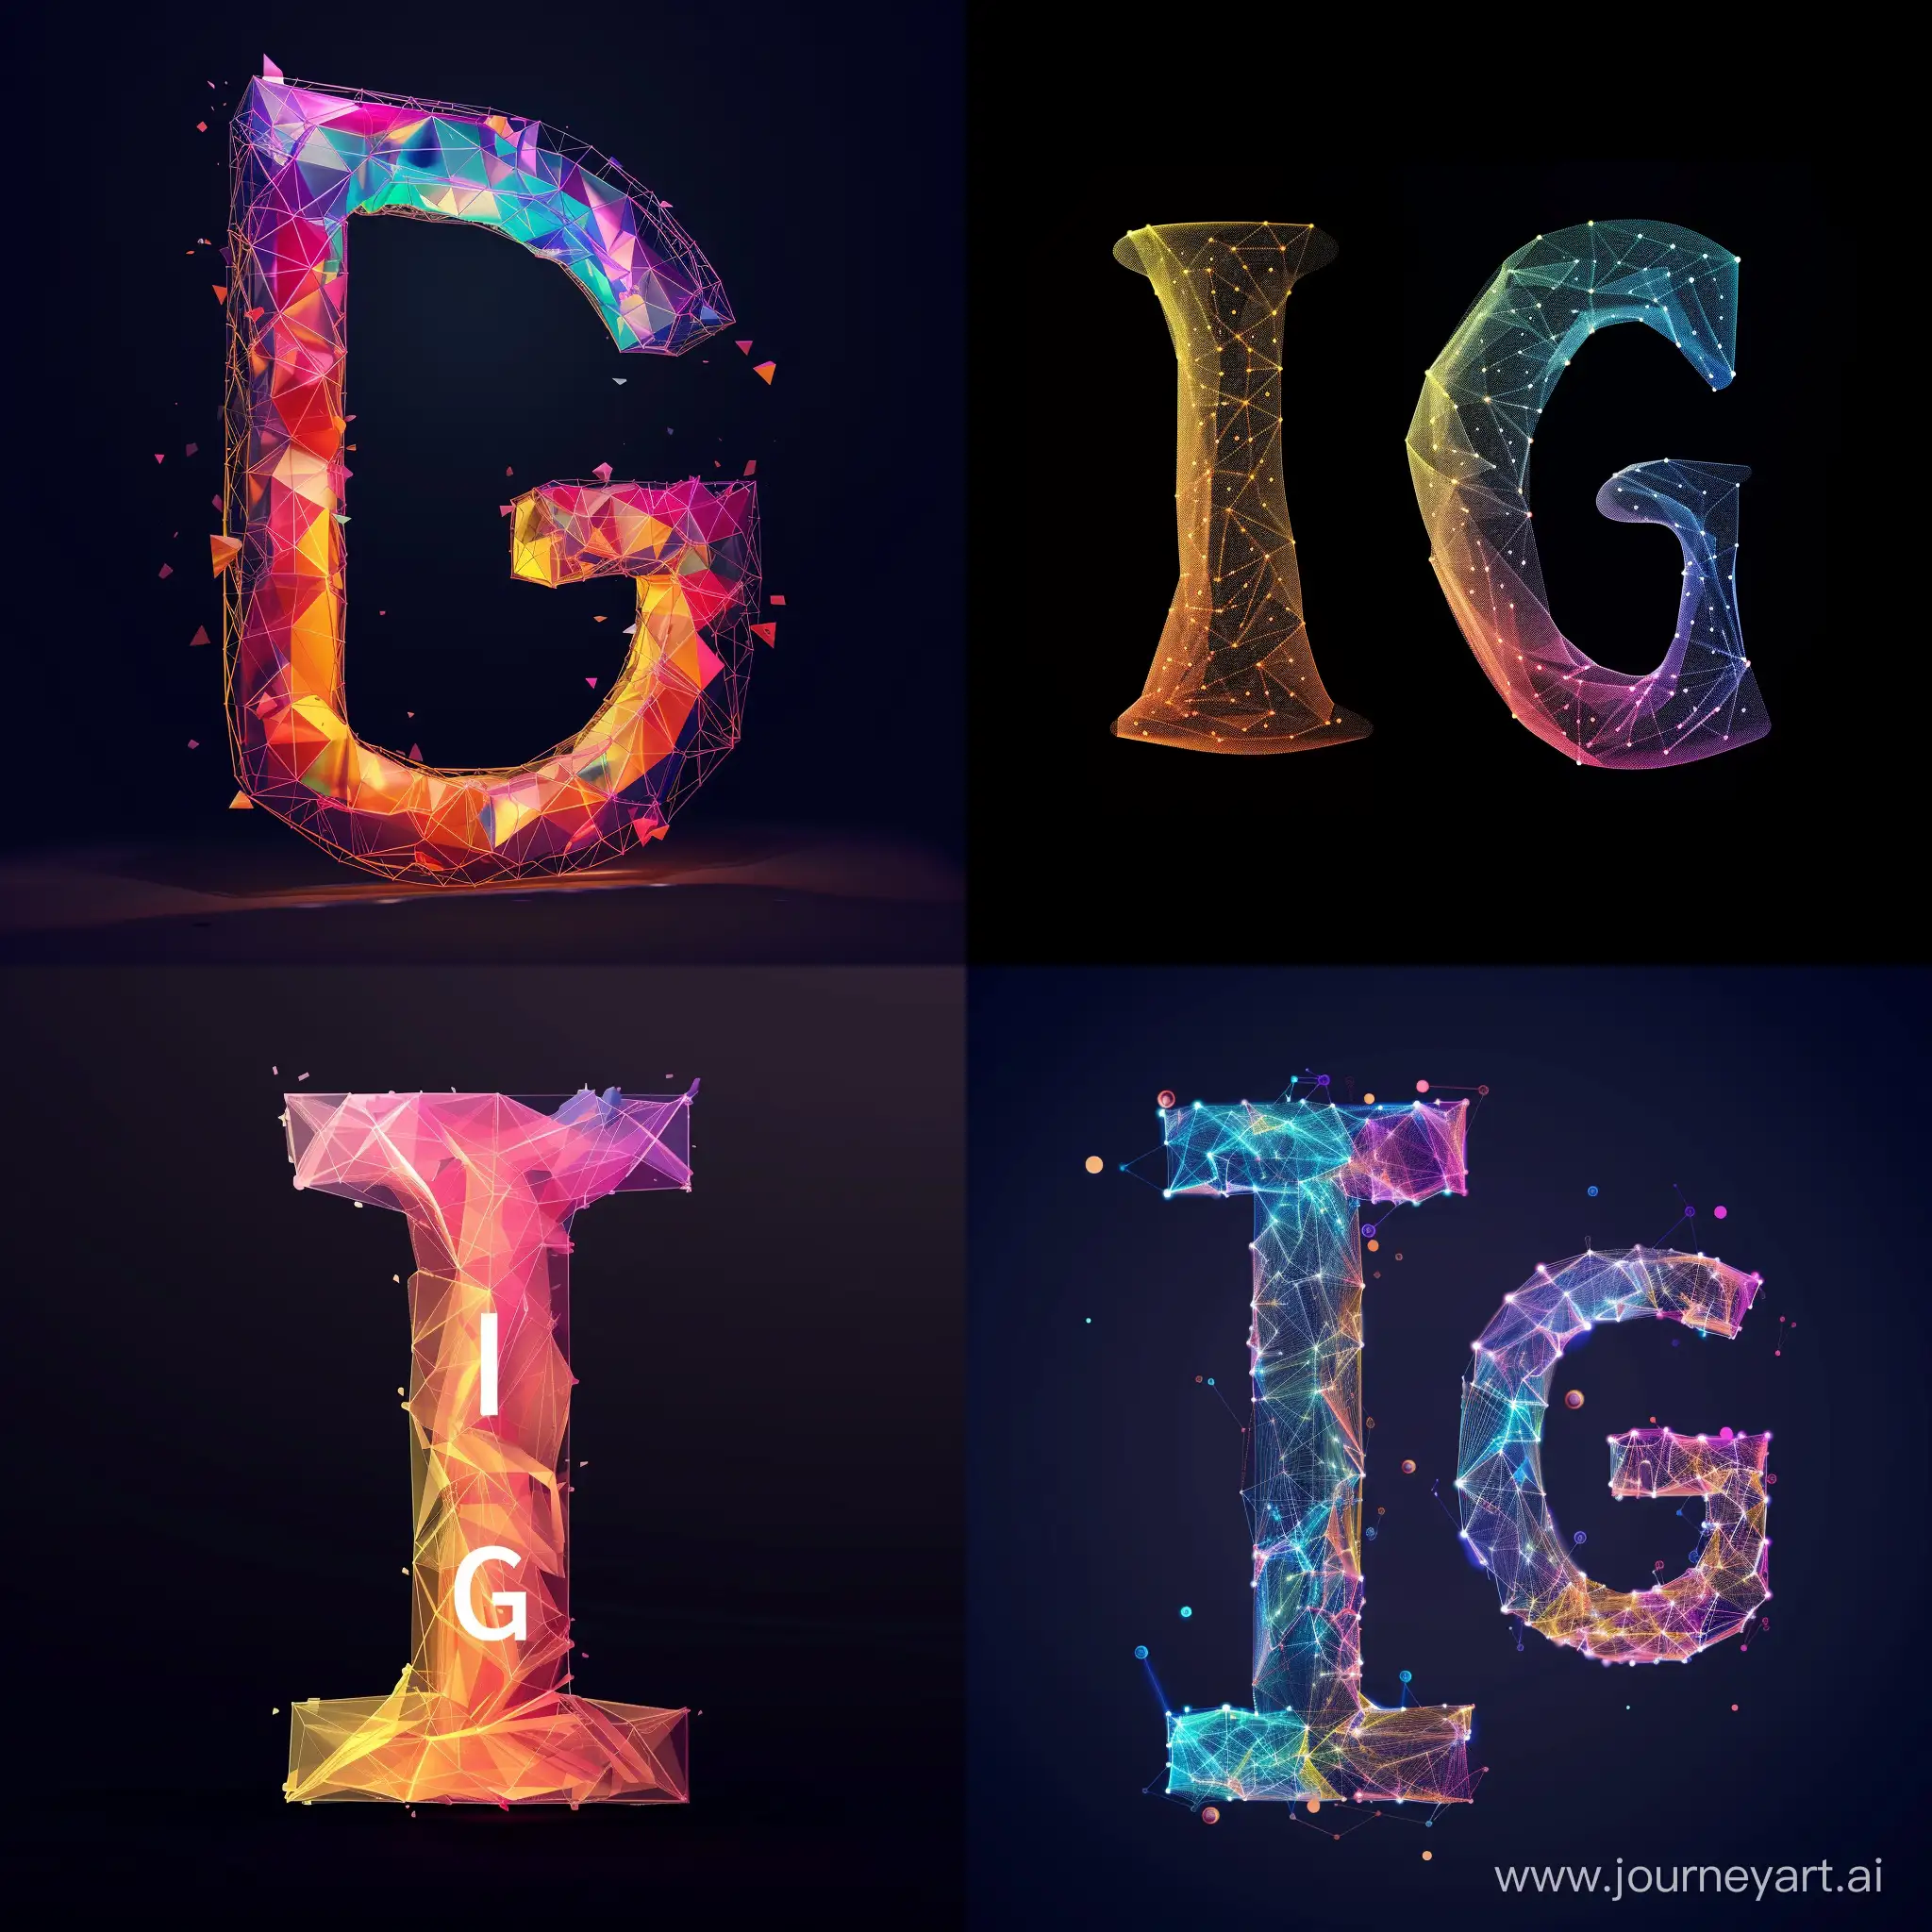 Letters I and G in a dynamic, connected loop, innovative shapes, simple, vibrant color, UHD resolution, subtle gradients, nutritionist website